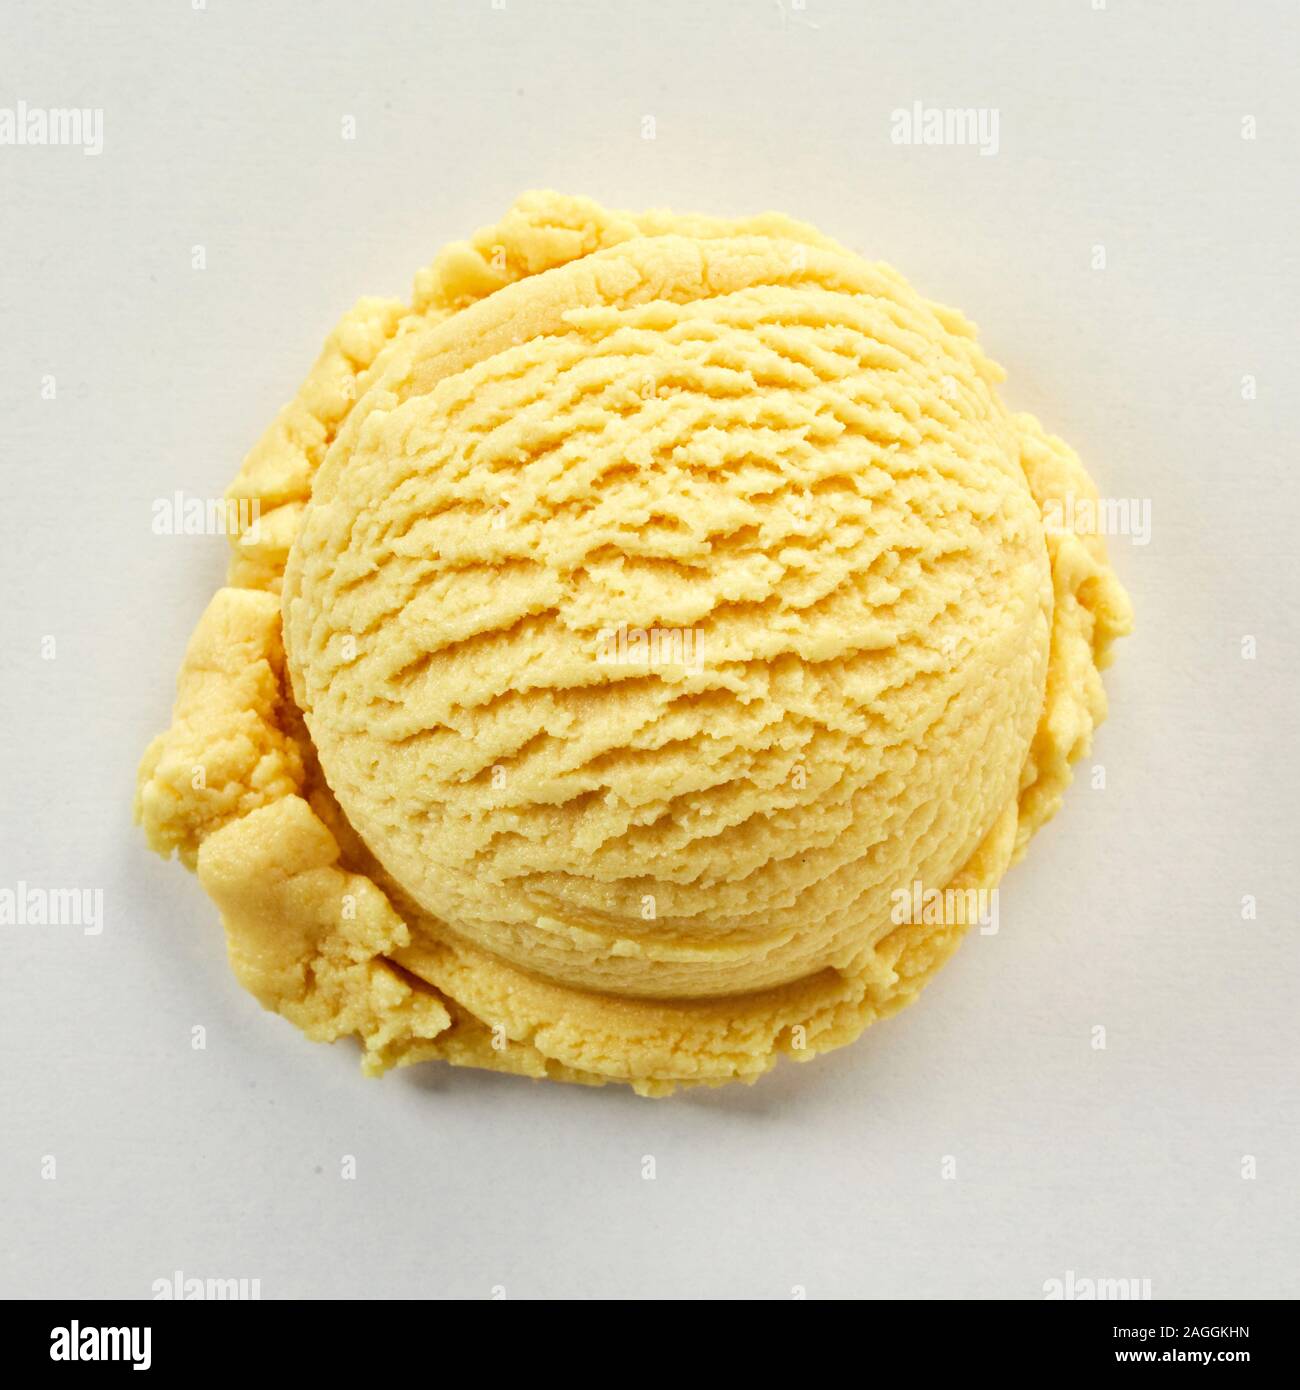 Scoop of yellow ice cream with banana flavour, viewed in close-up on grey background Stock Photo